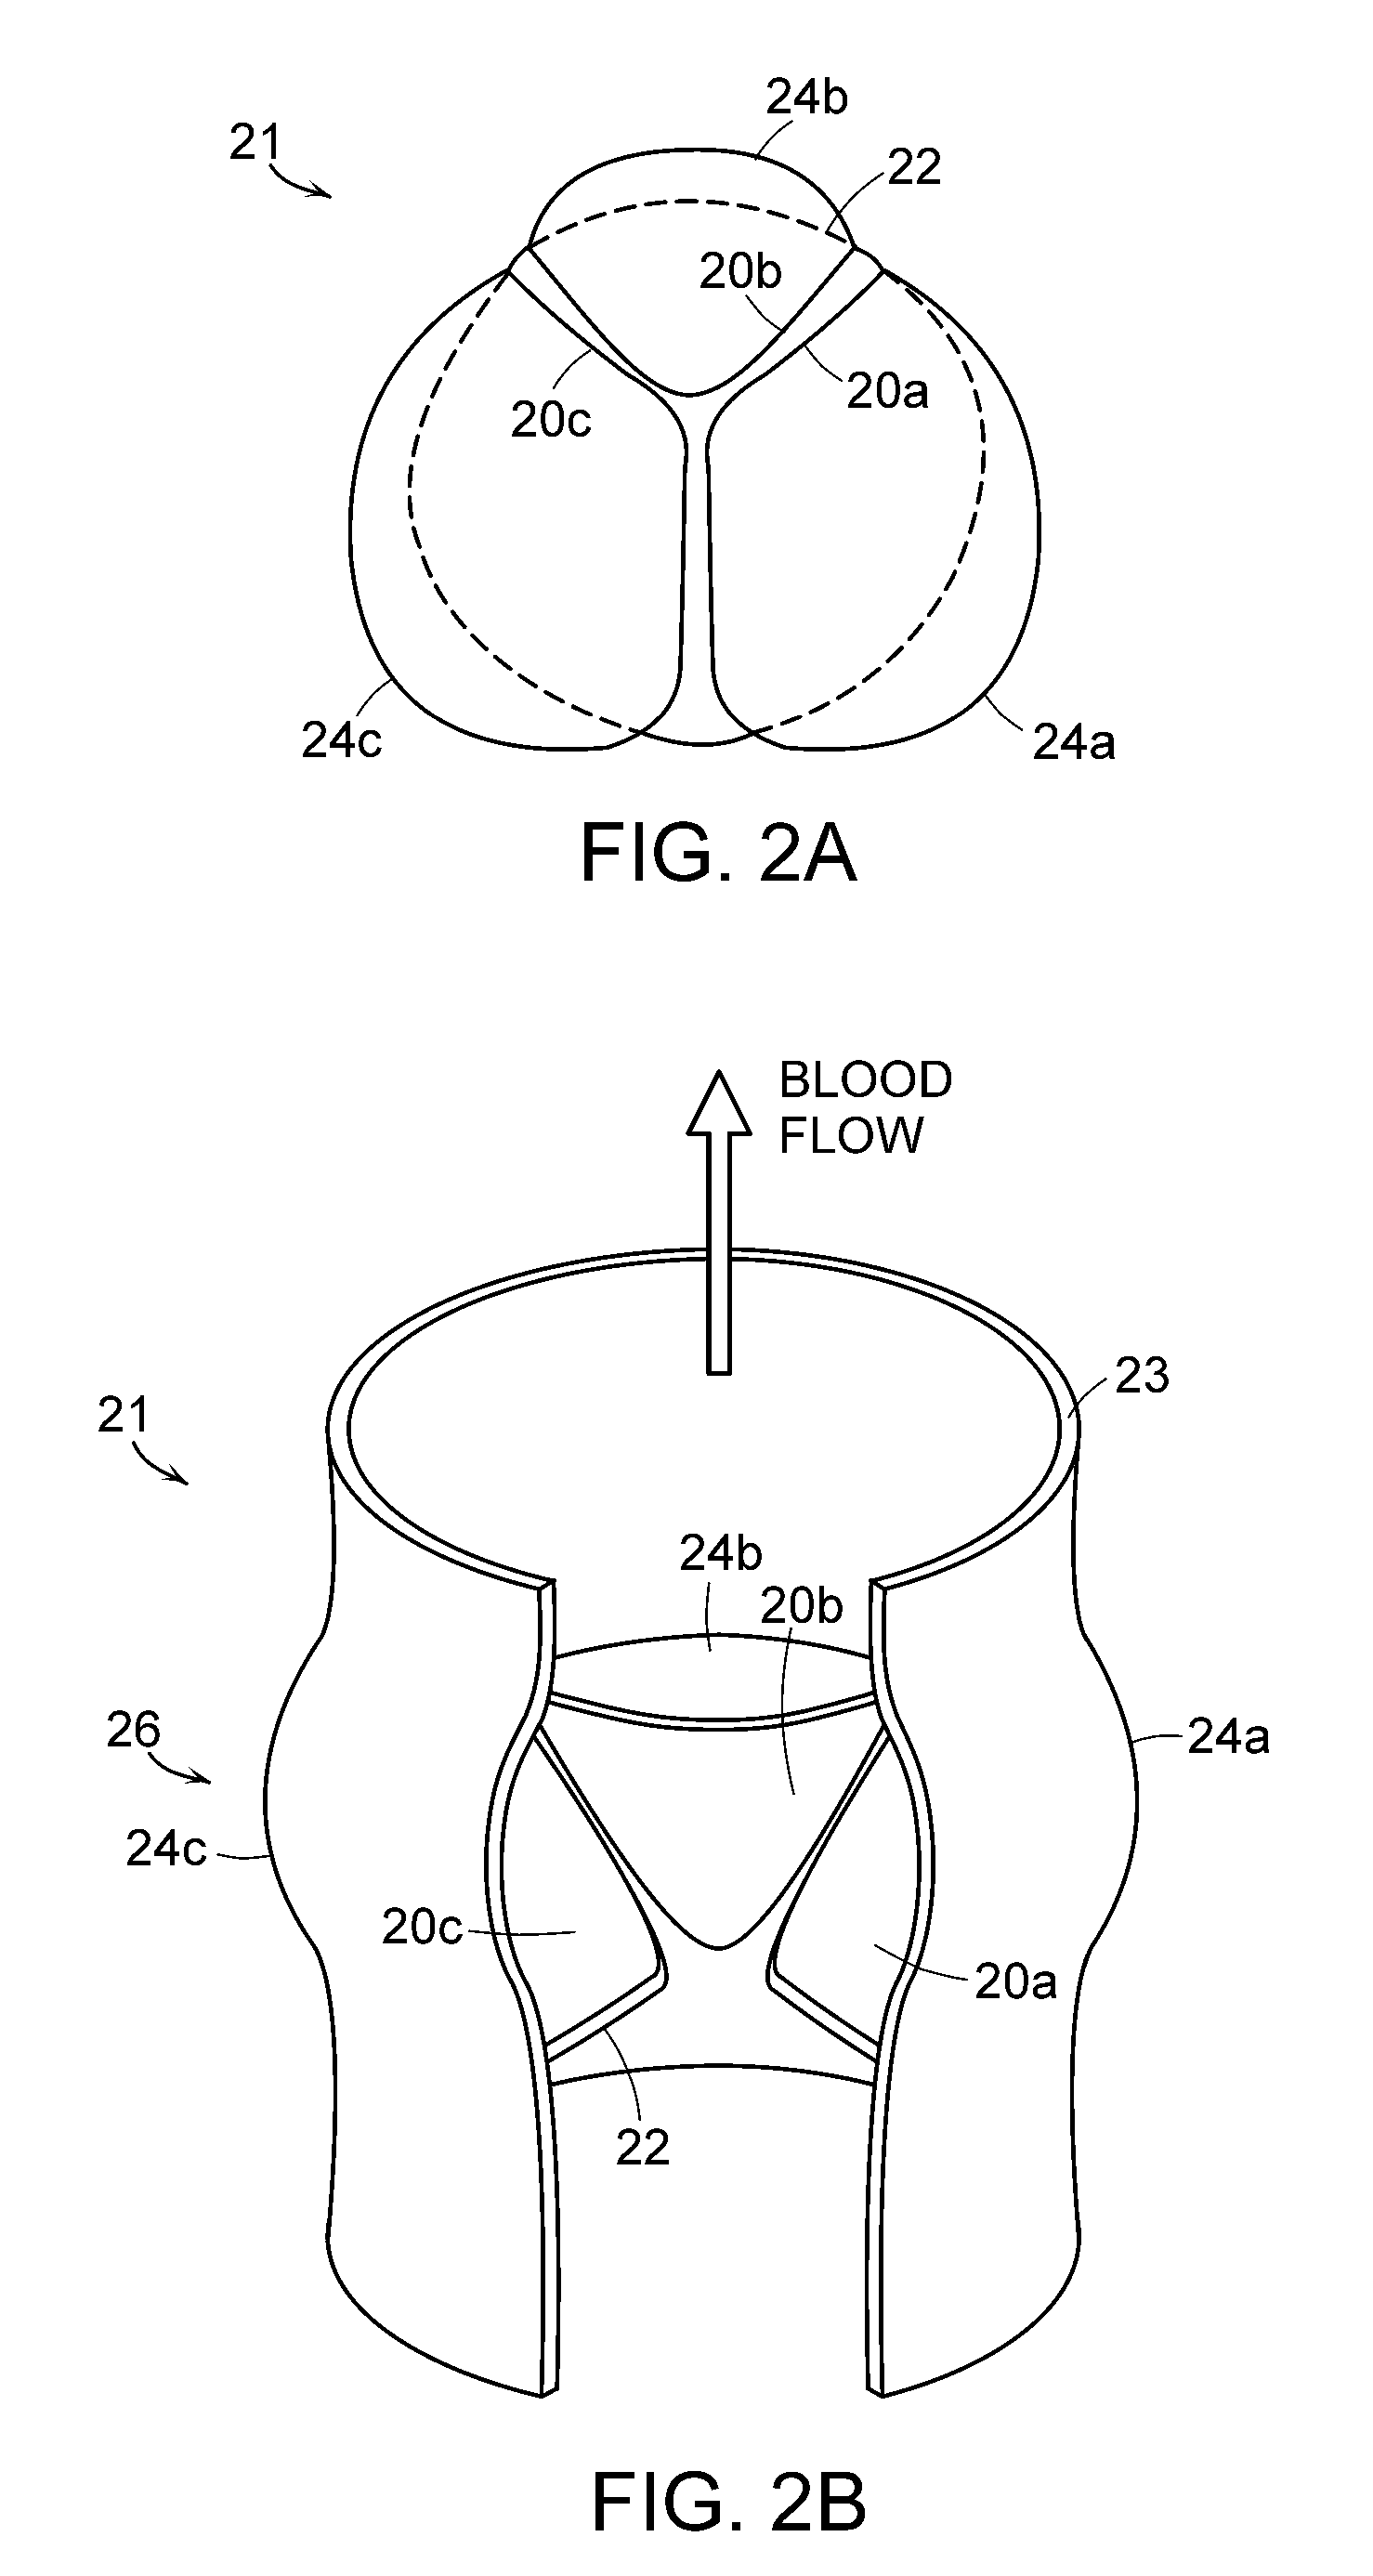 Transcatheter Delivery of a Replacement Heart Valve